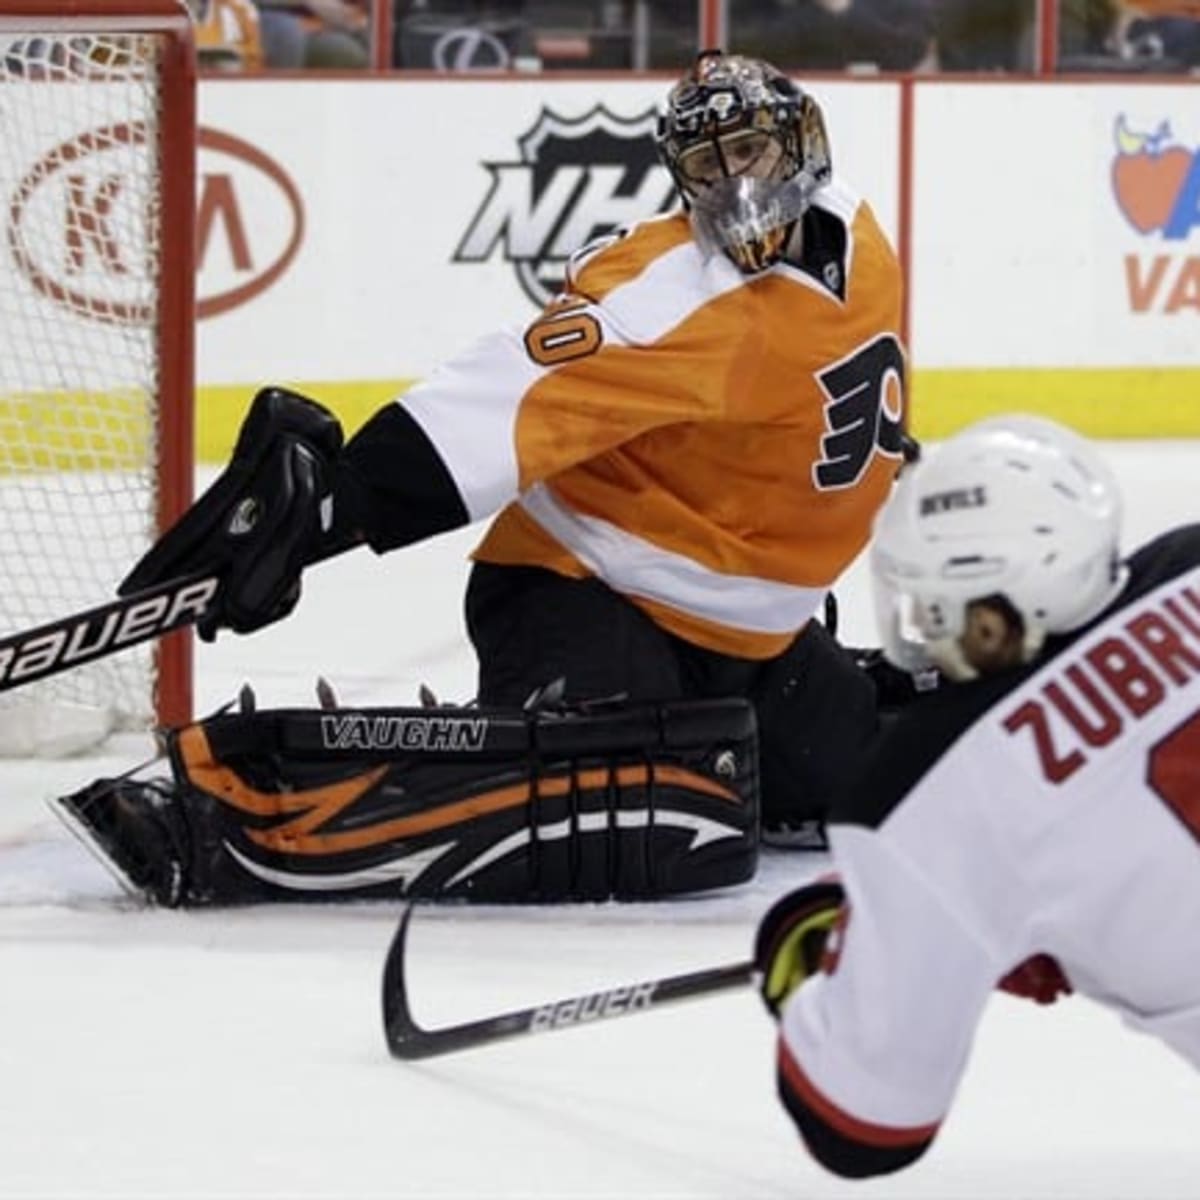 Dainius Zubrus thinks NHL made right decision to suspend Flyers